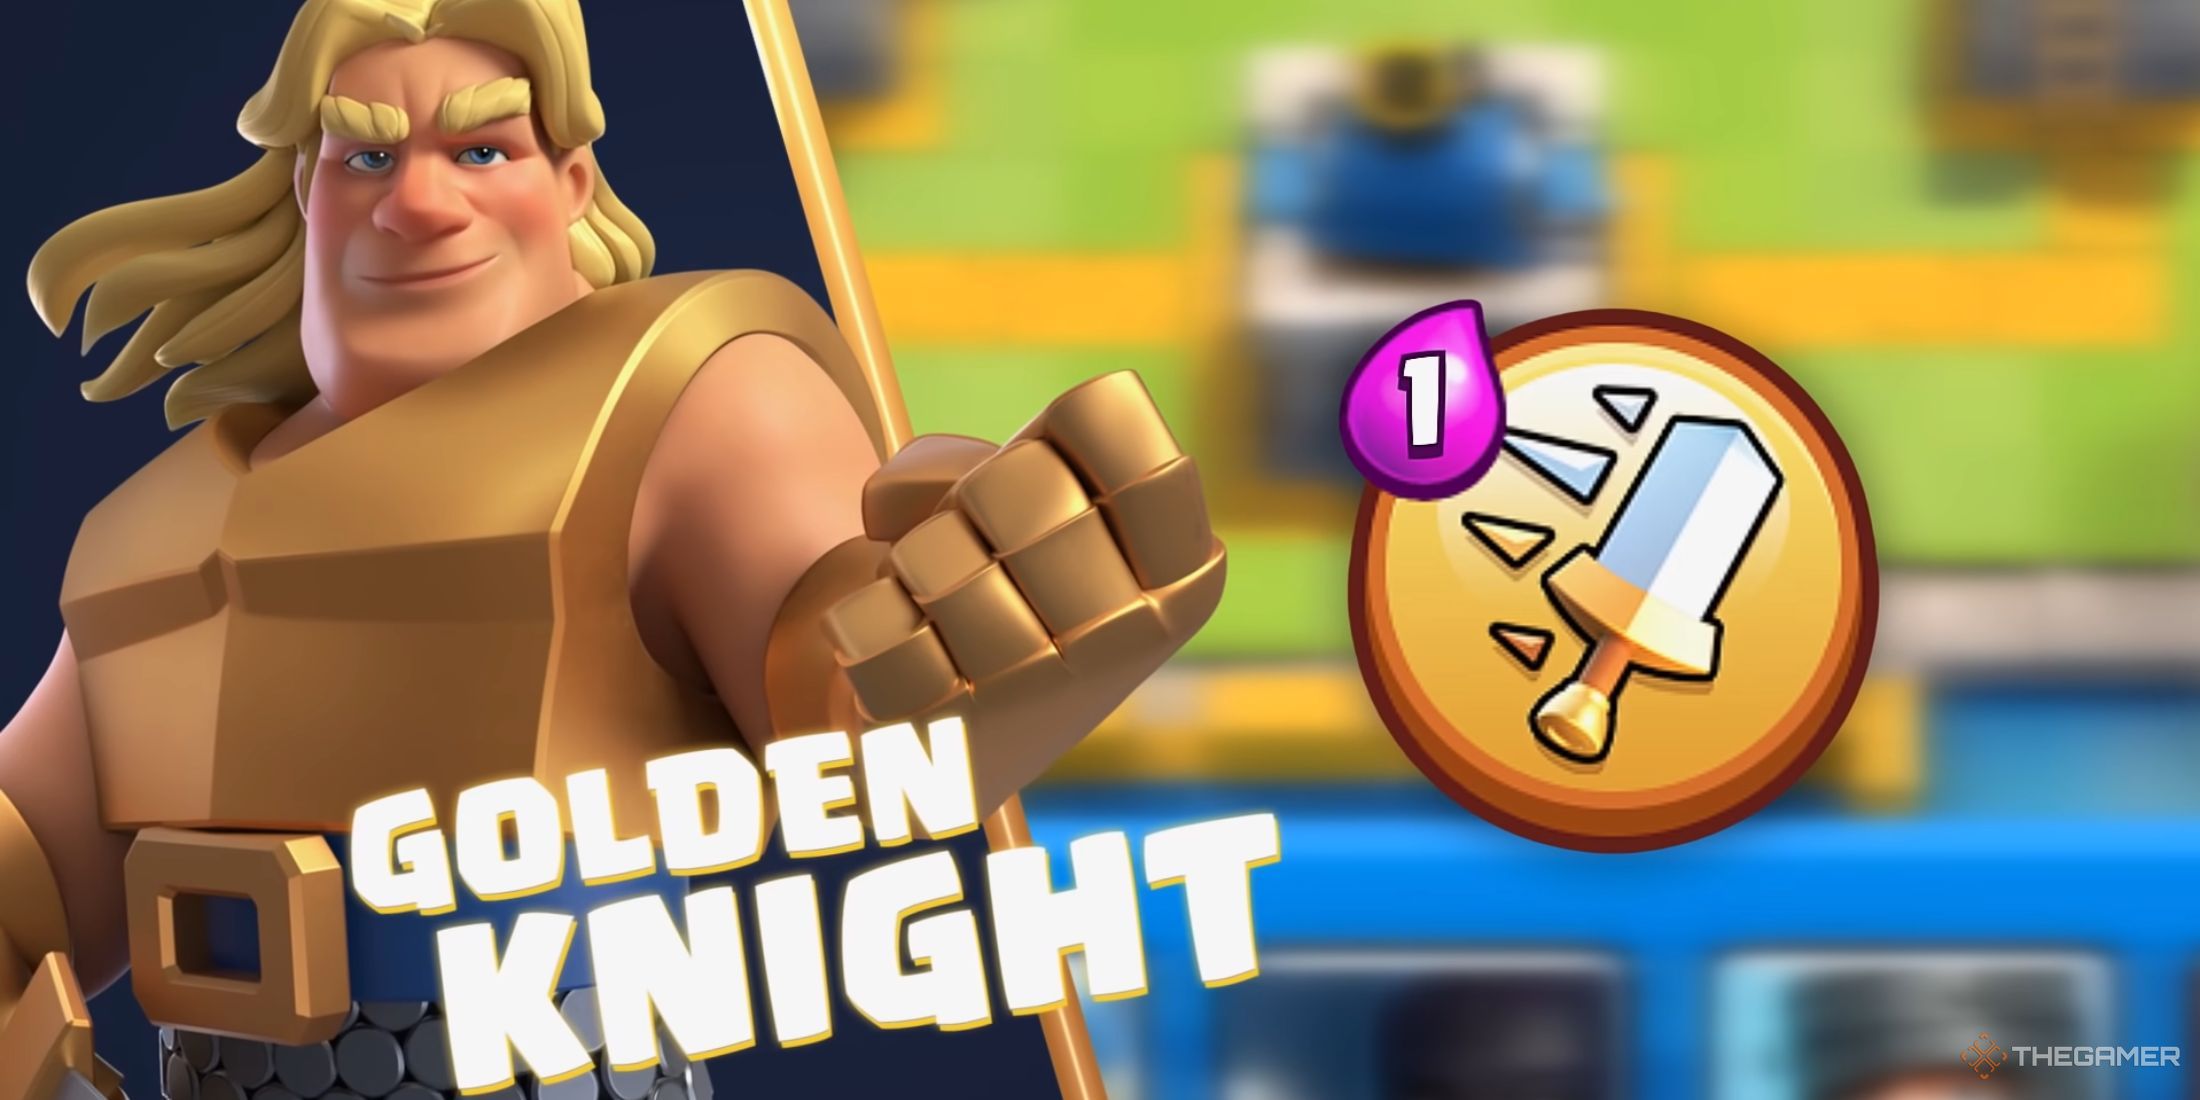 The golden knight with closed fist and his ability.